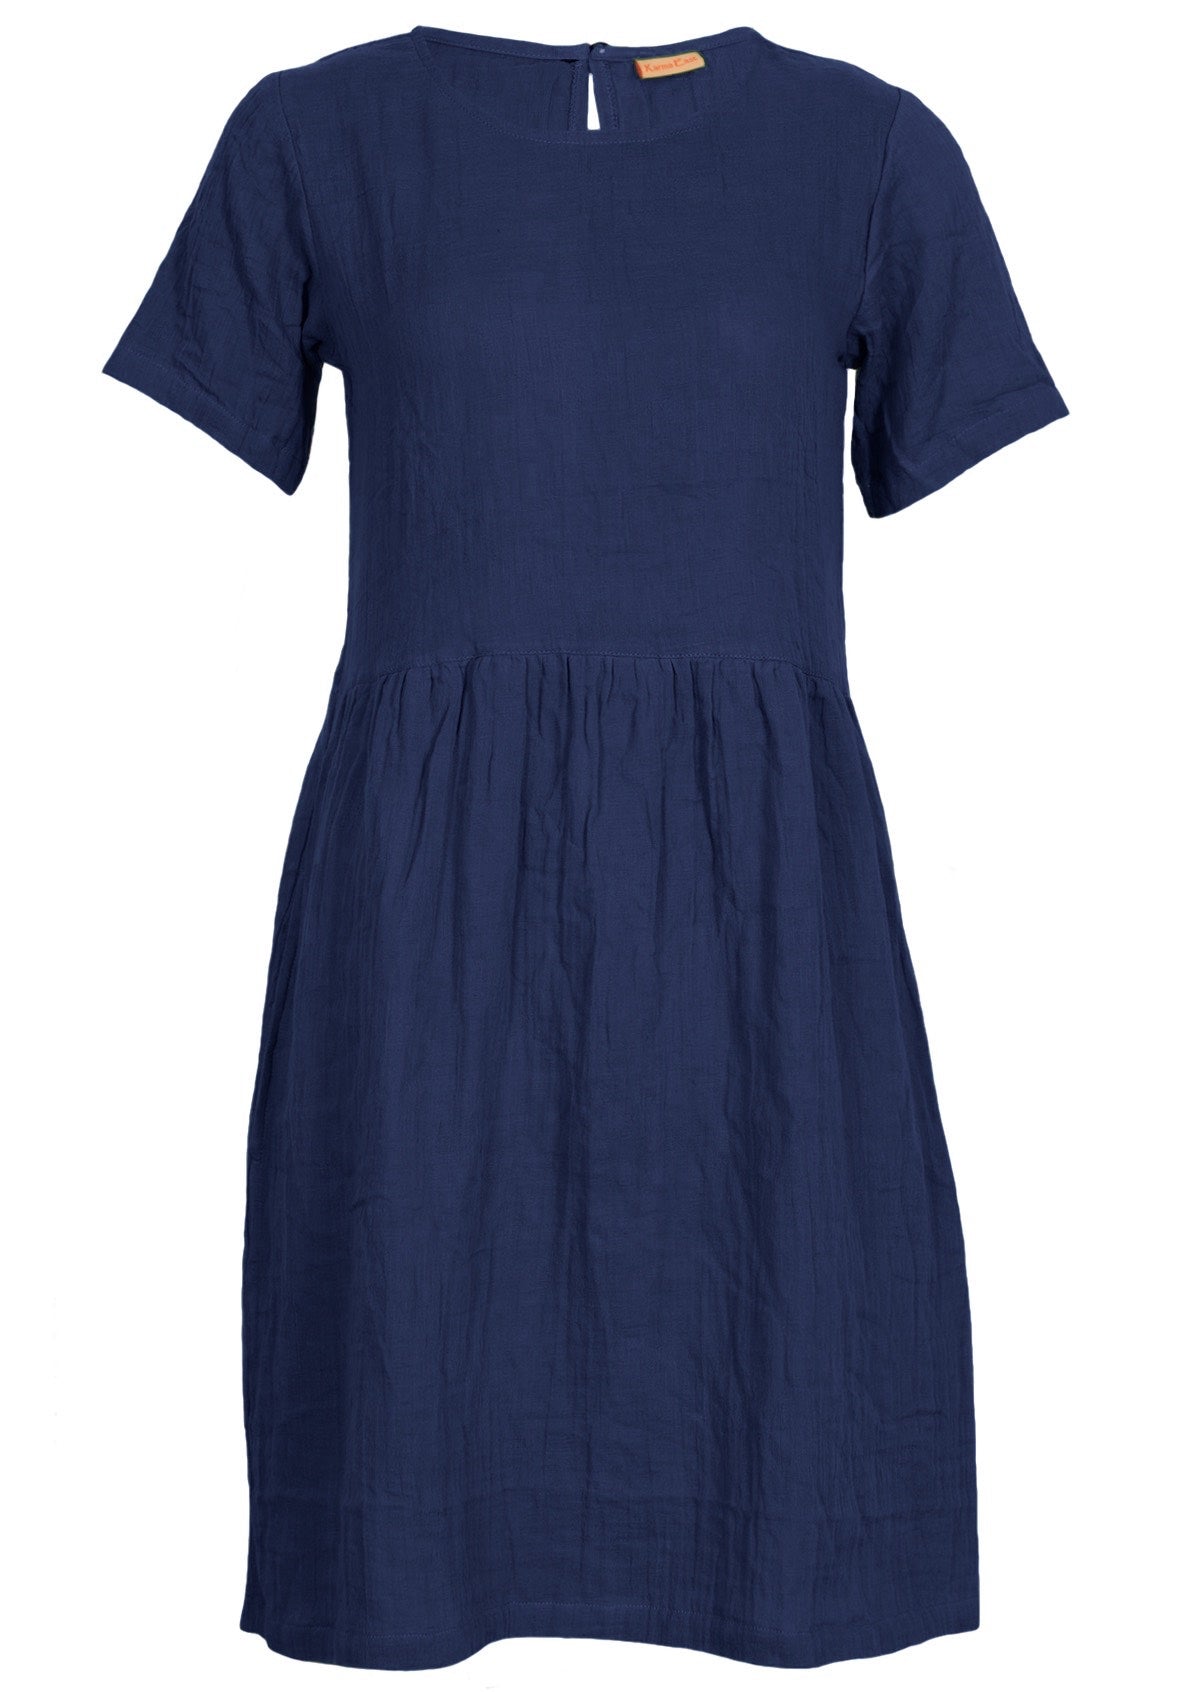 Deep blue double cotton short sleeve above the knee relaxed fit dress